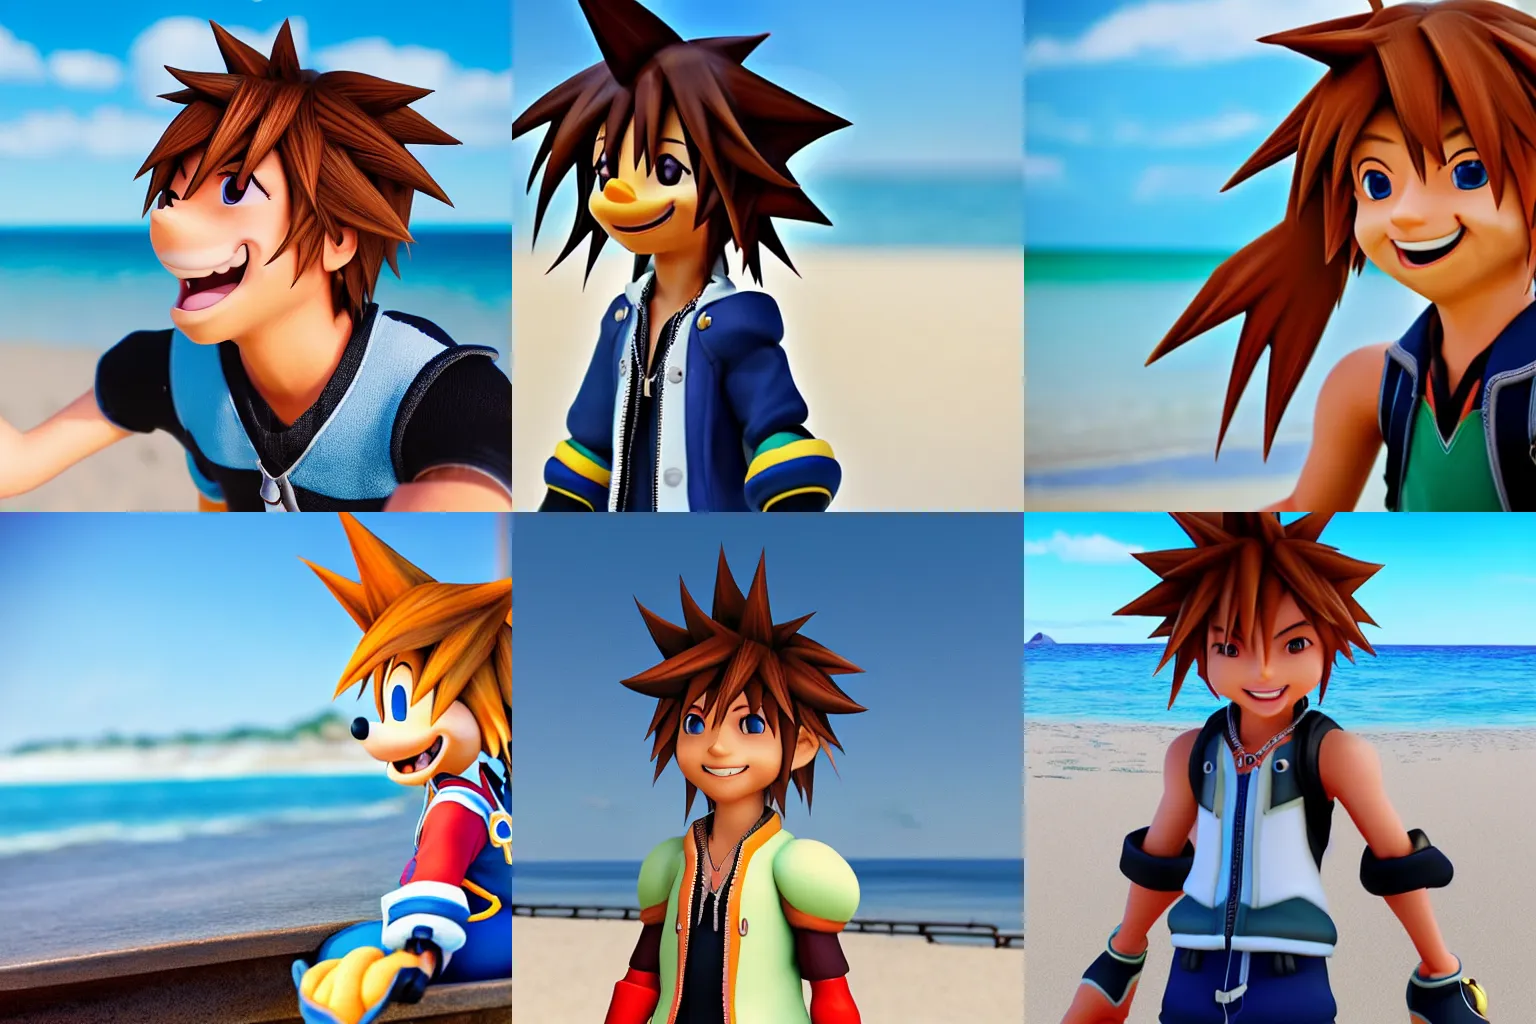 Prompt: candid photo of Sora from Kingdom hearts smiling at the beach. 85 mm lens. Award winning photography.